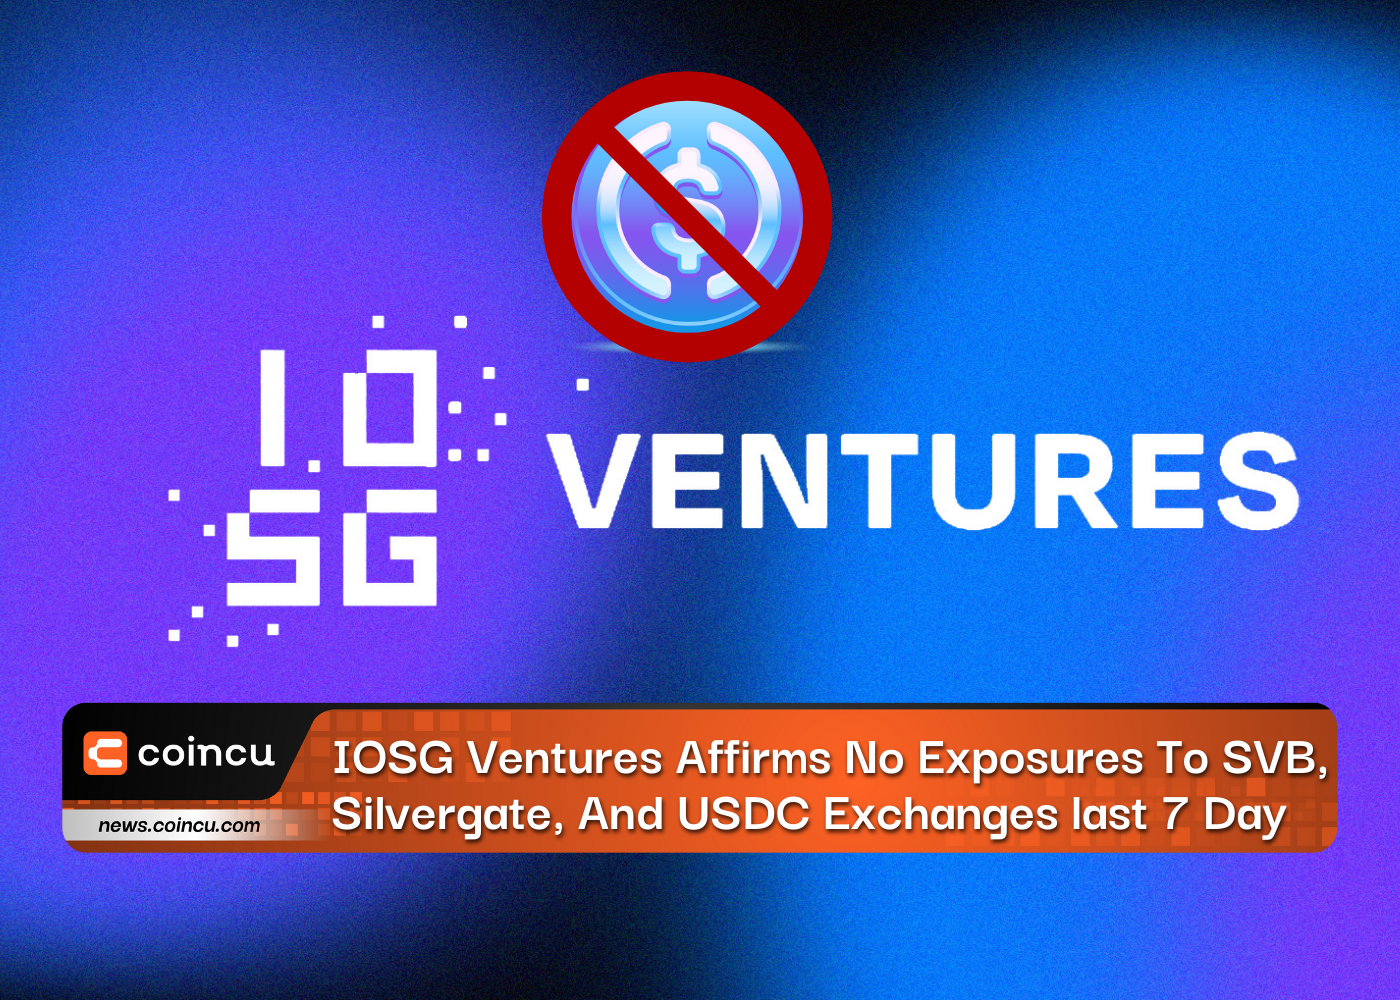 IOSG Ventures Affirms No Exposures To SVB, Silvergate, And USDC Exchanges last 7 Day